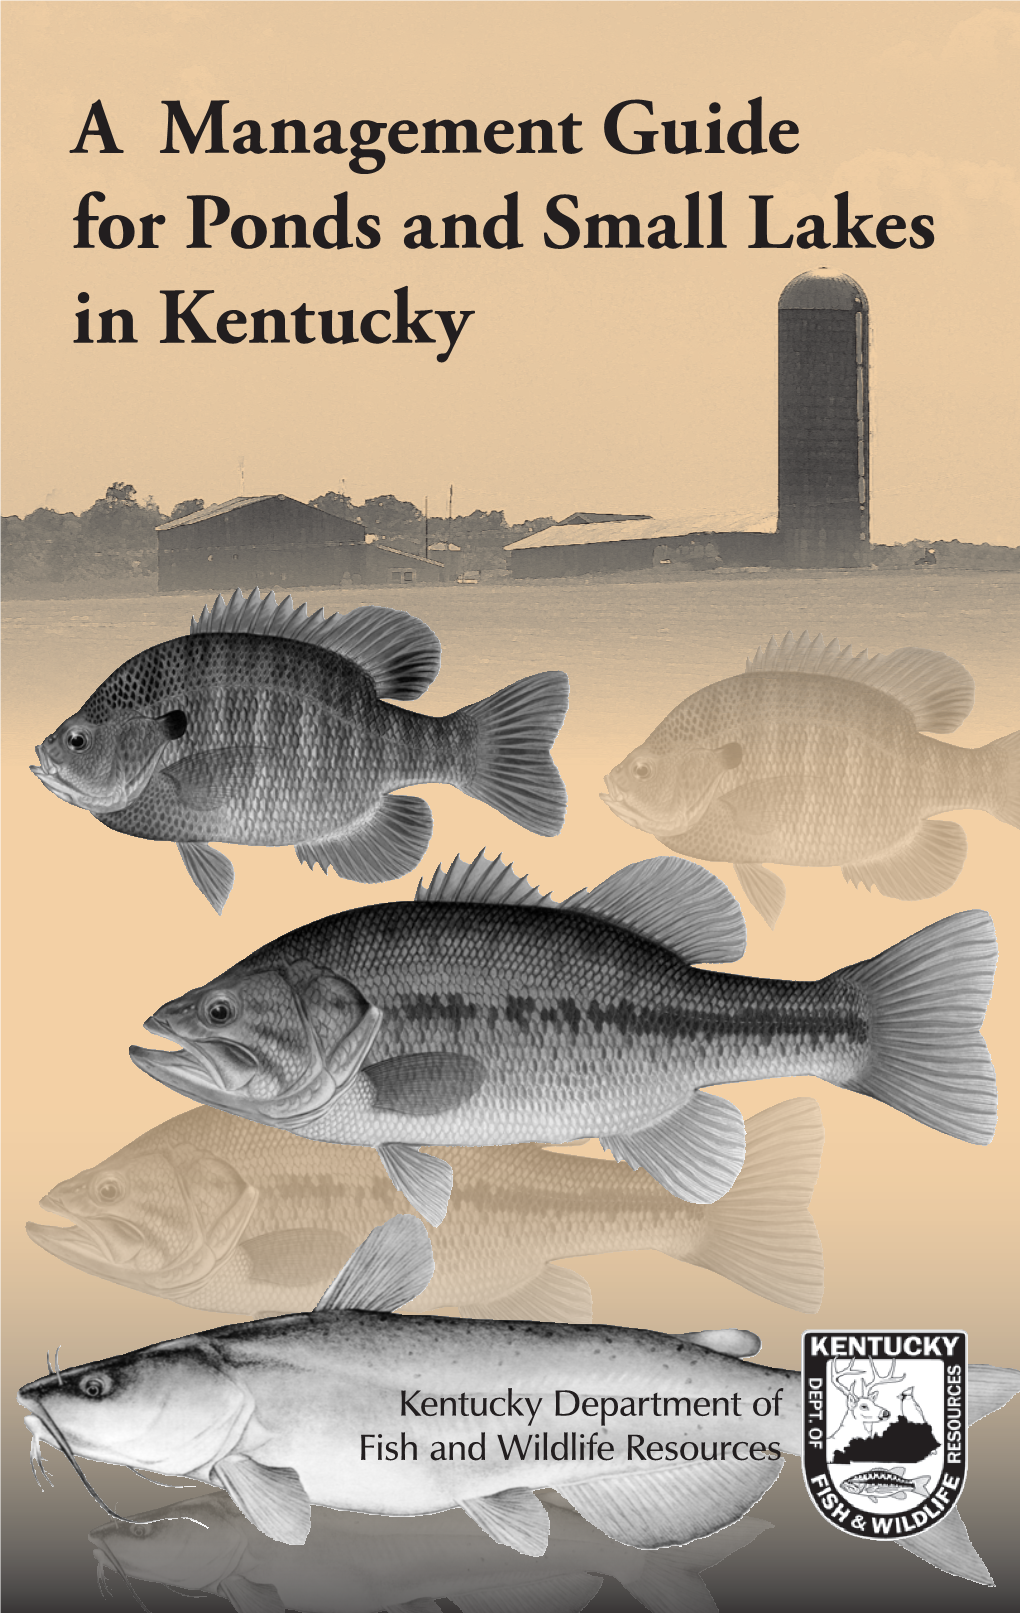 A Management Guide for Ponds and Small Lakes in Kentucky